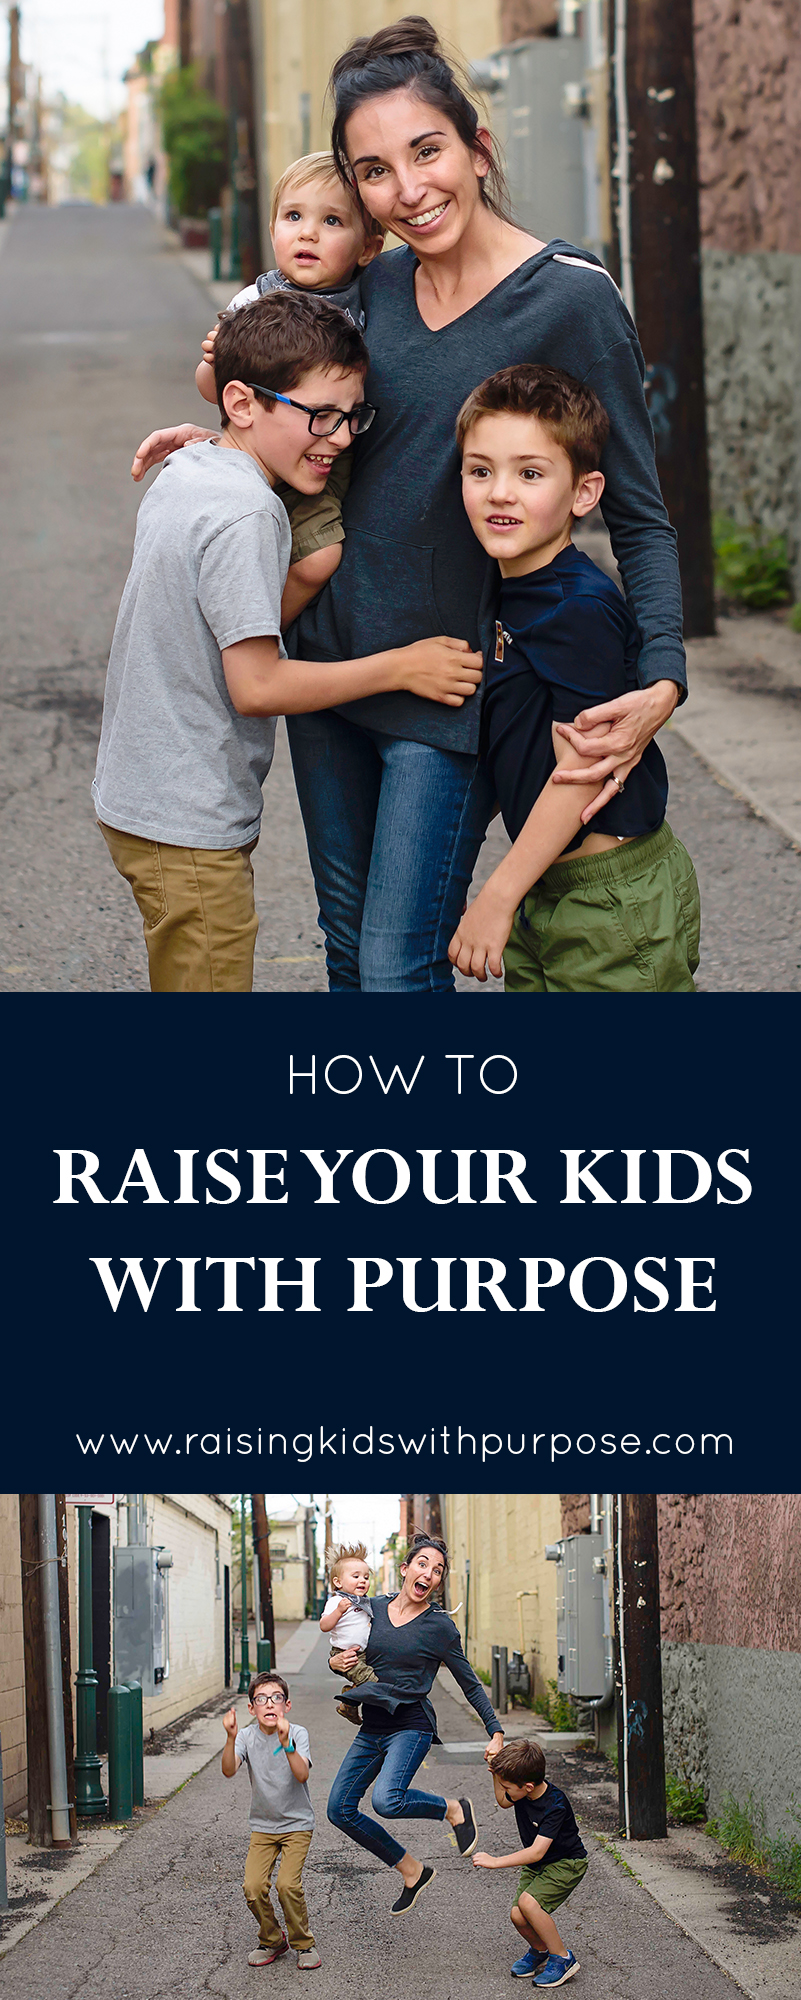 Join me on my blog, www.raisingkidswithpurose.com to find tips and tricks to best parent your kids and to create a happy home. 